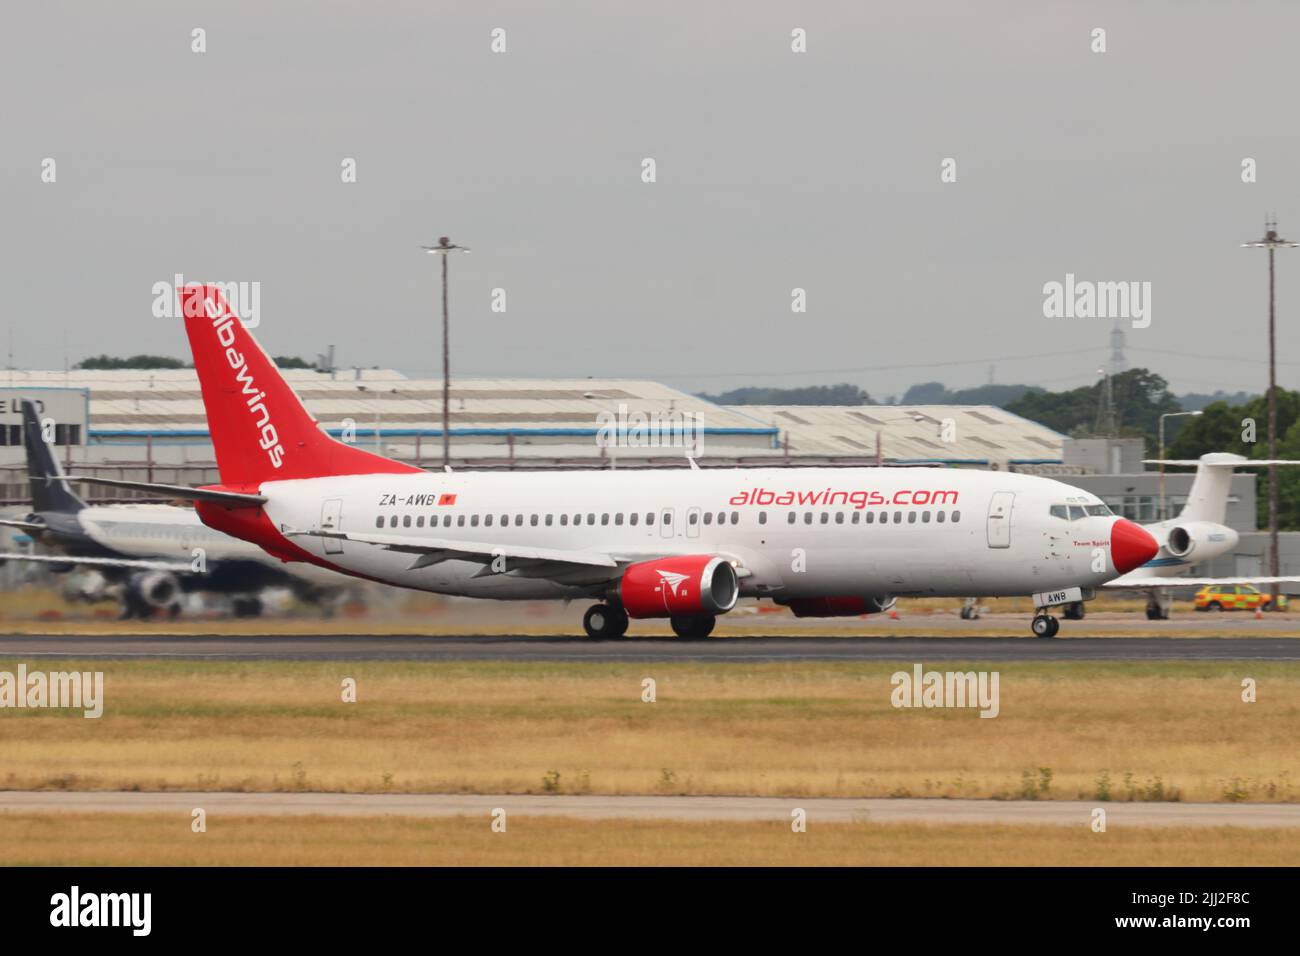 Albawings, Boeing 737 ZA-AWB, departing Stansted Airport, Essex, UK Stock Photo